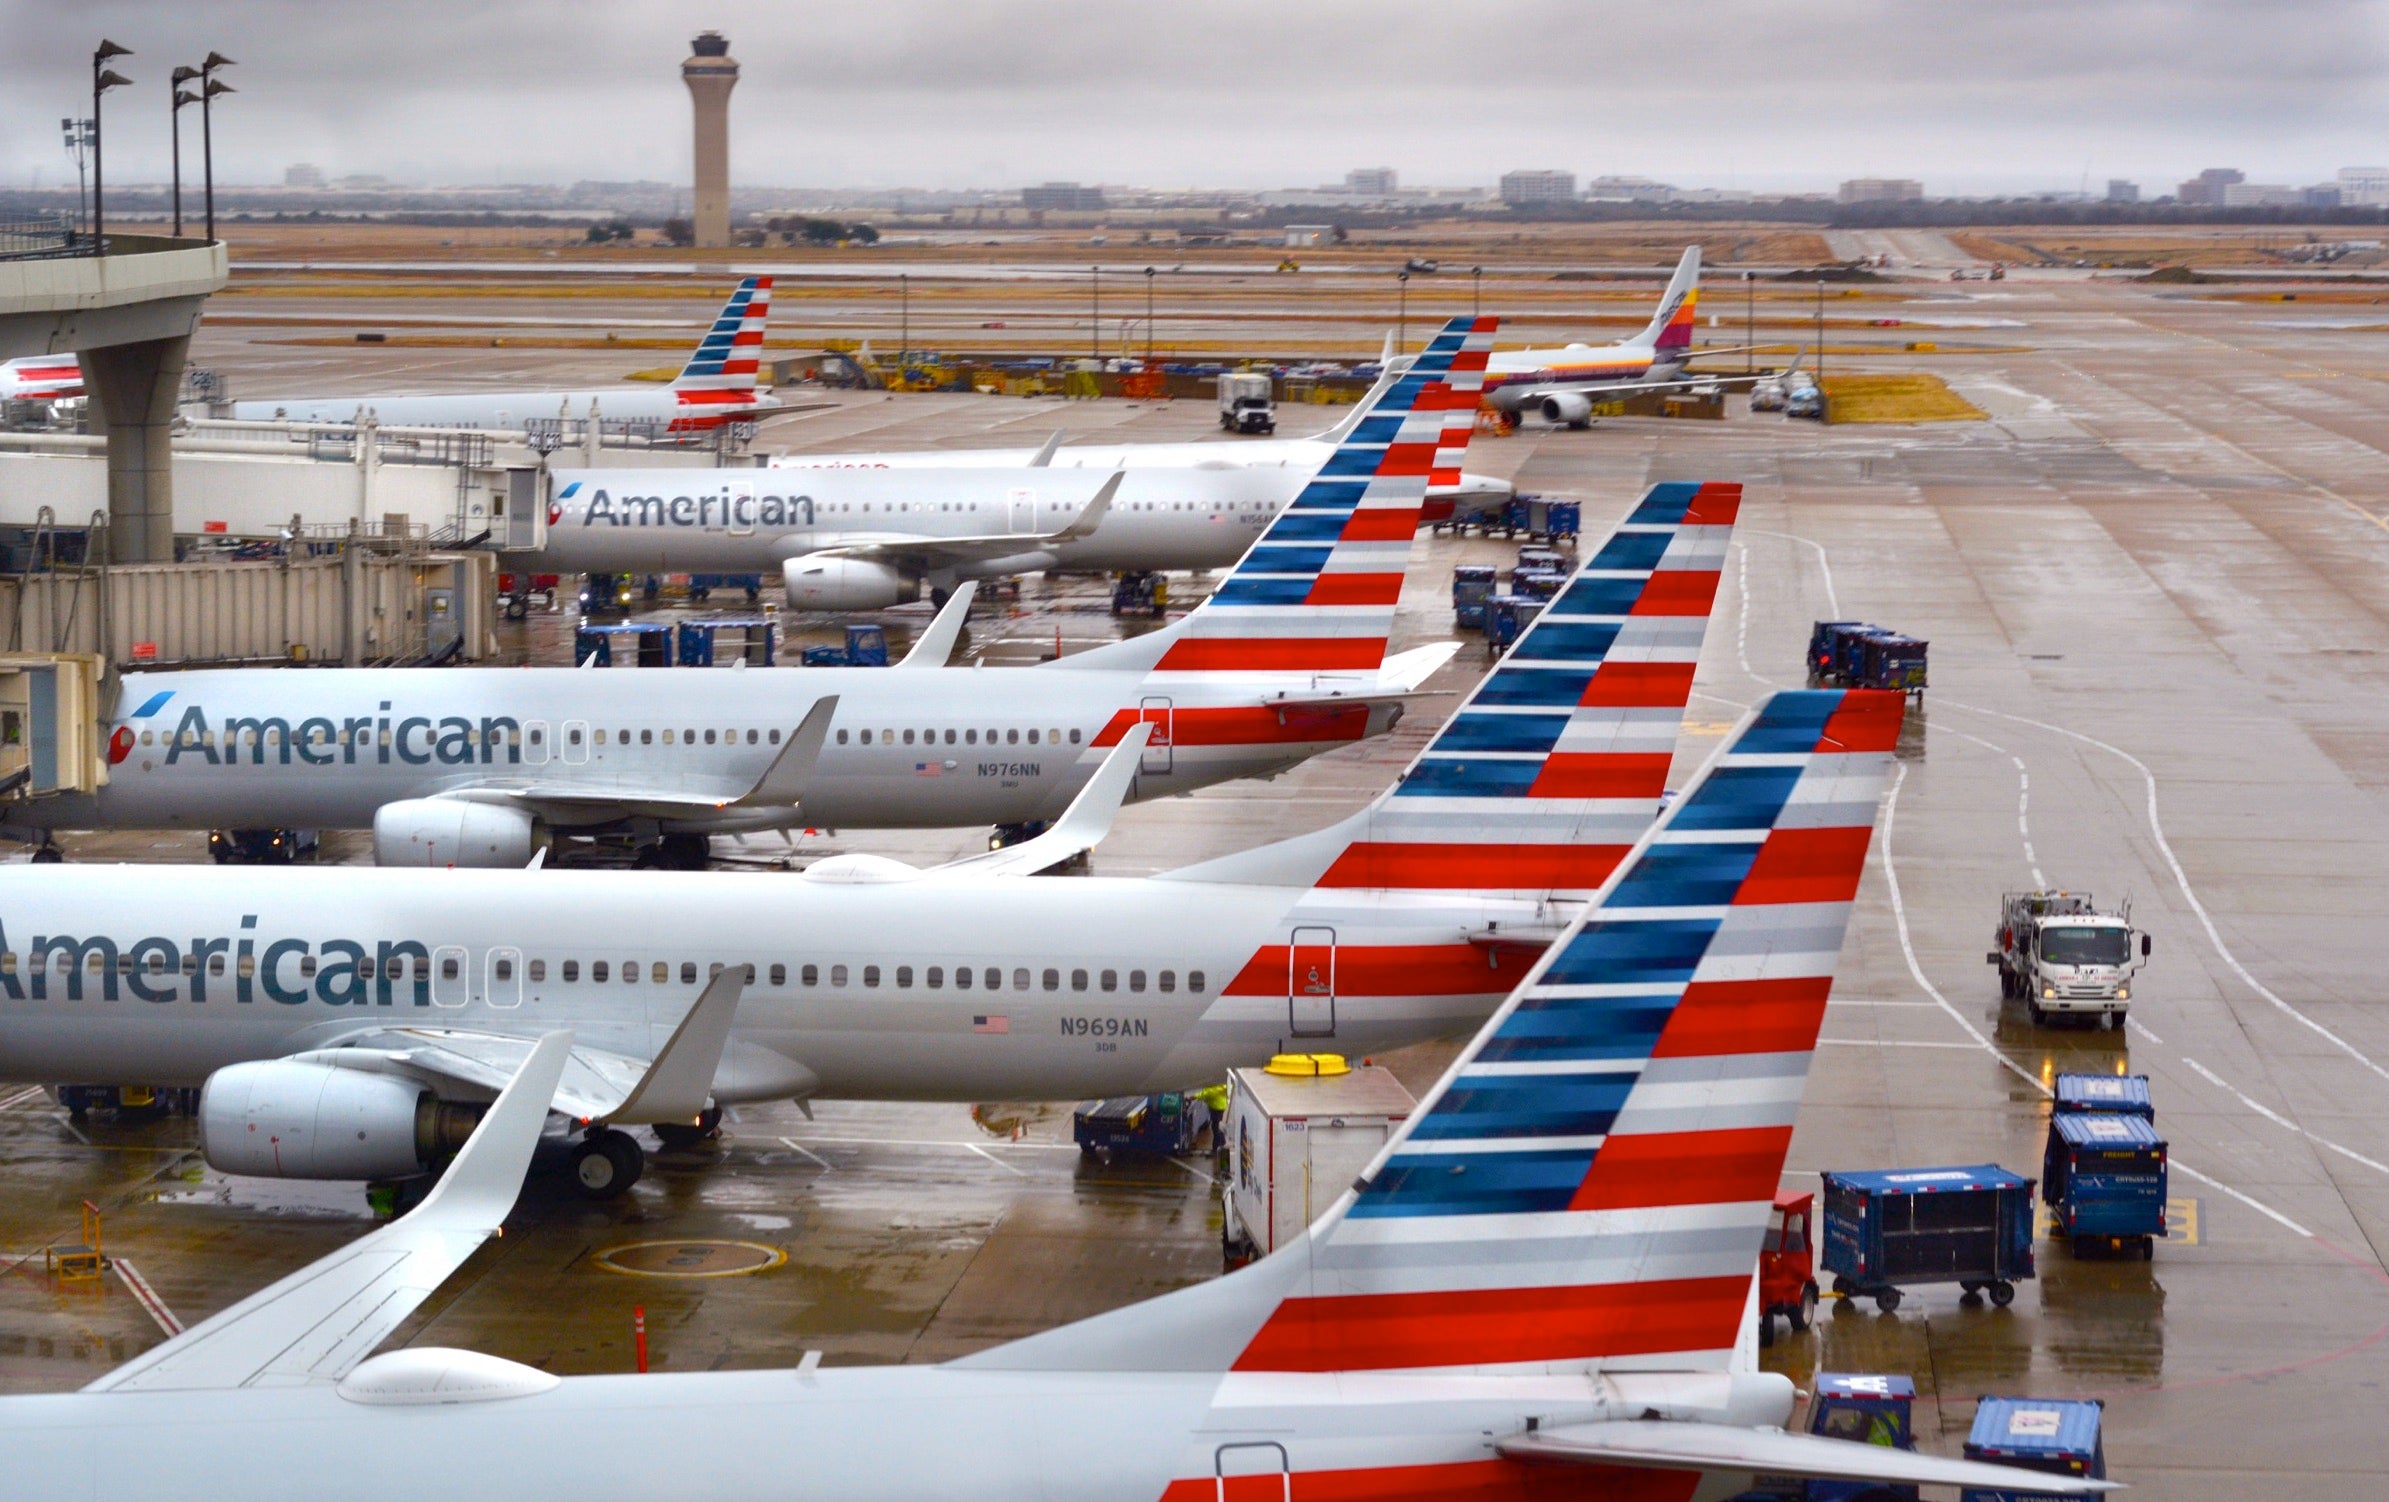 American Airlines jets at the gate in Dallas